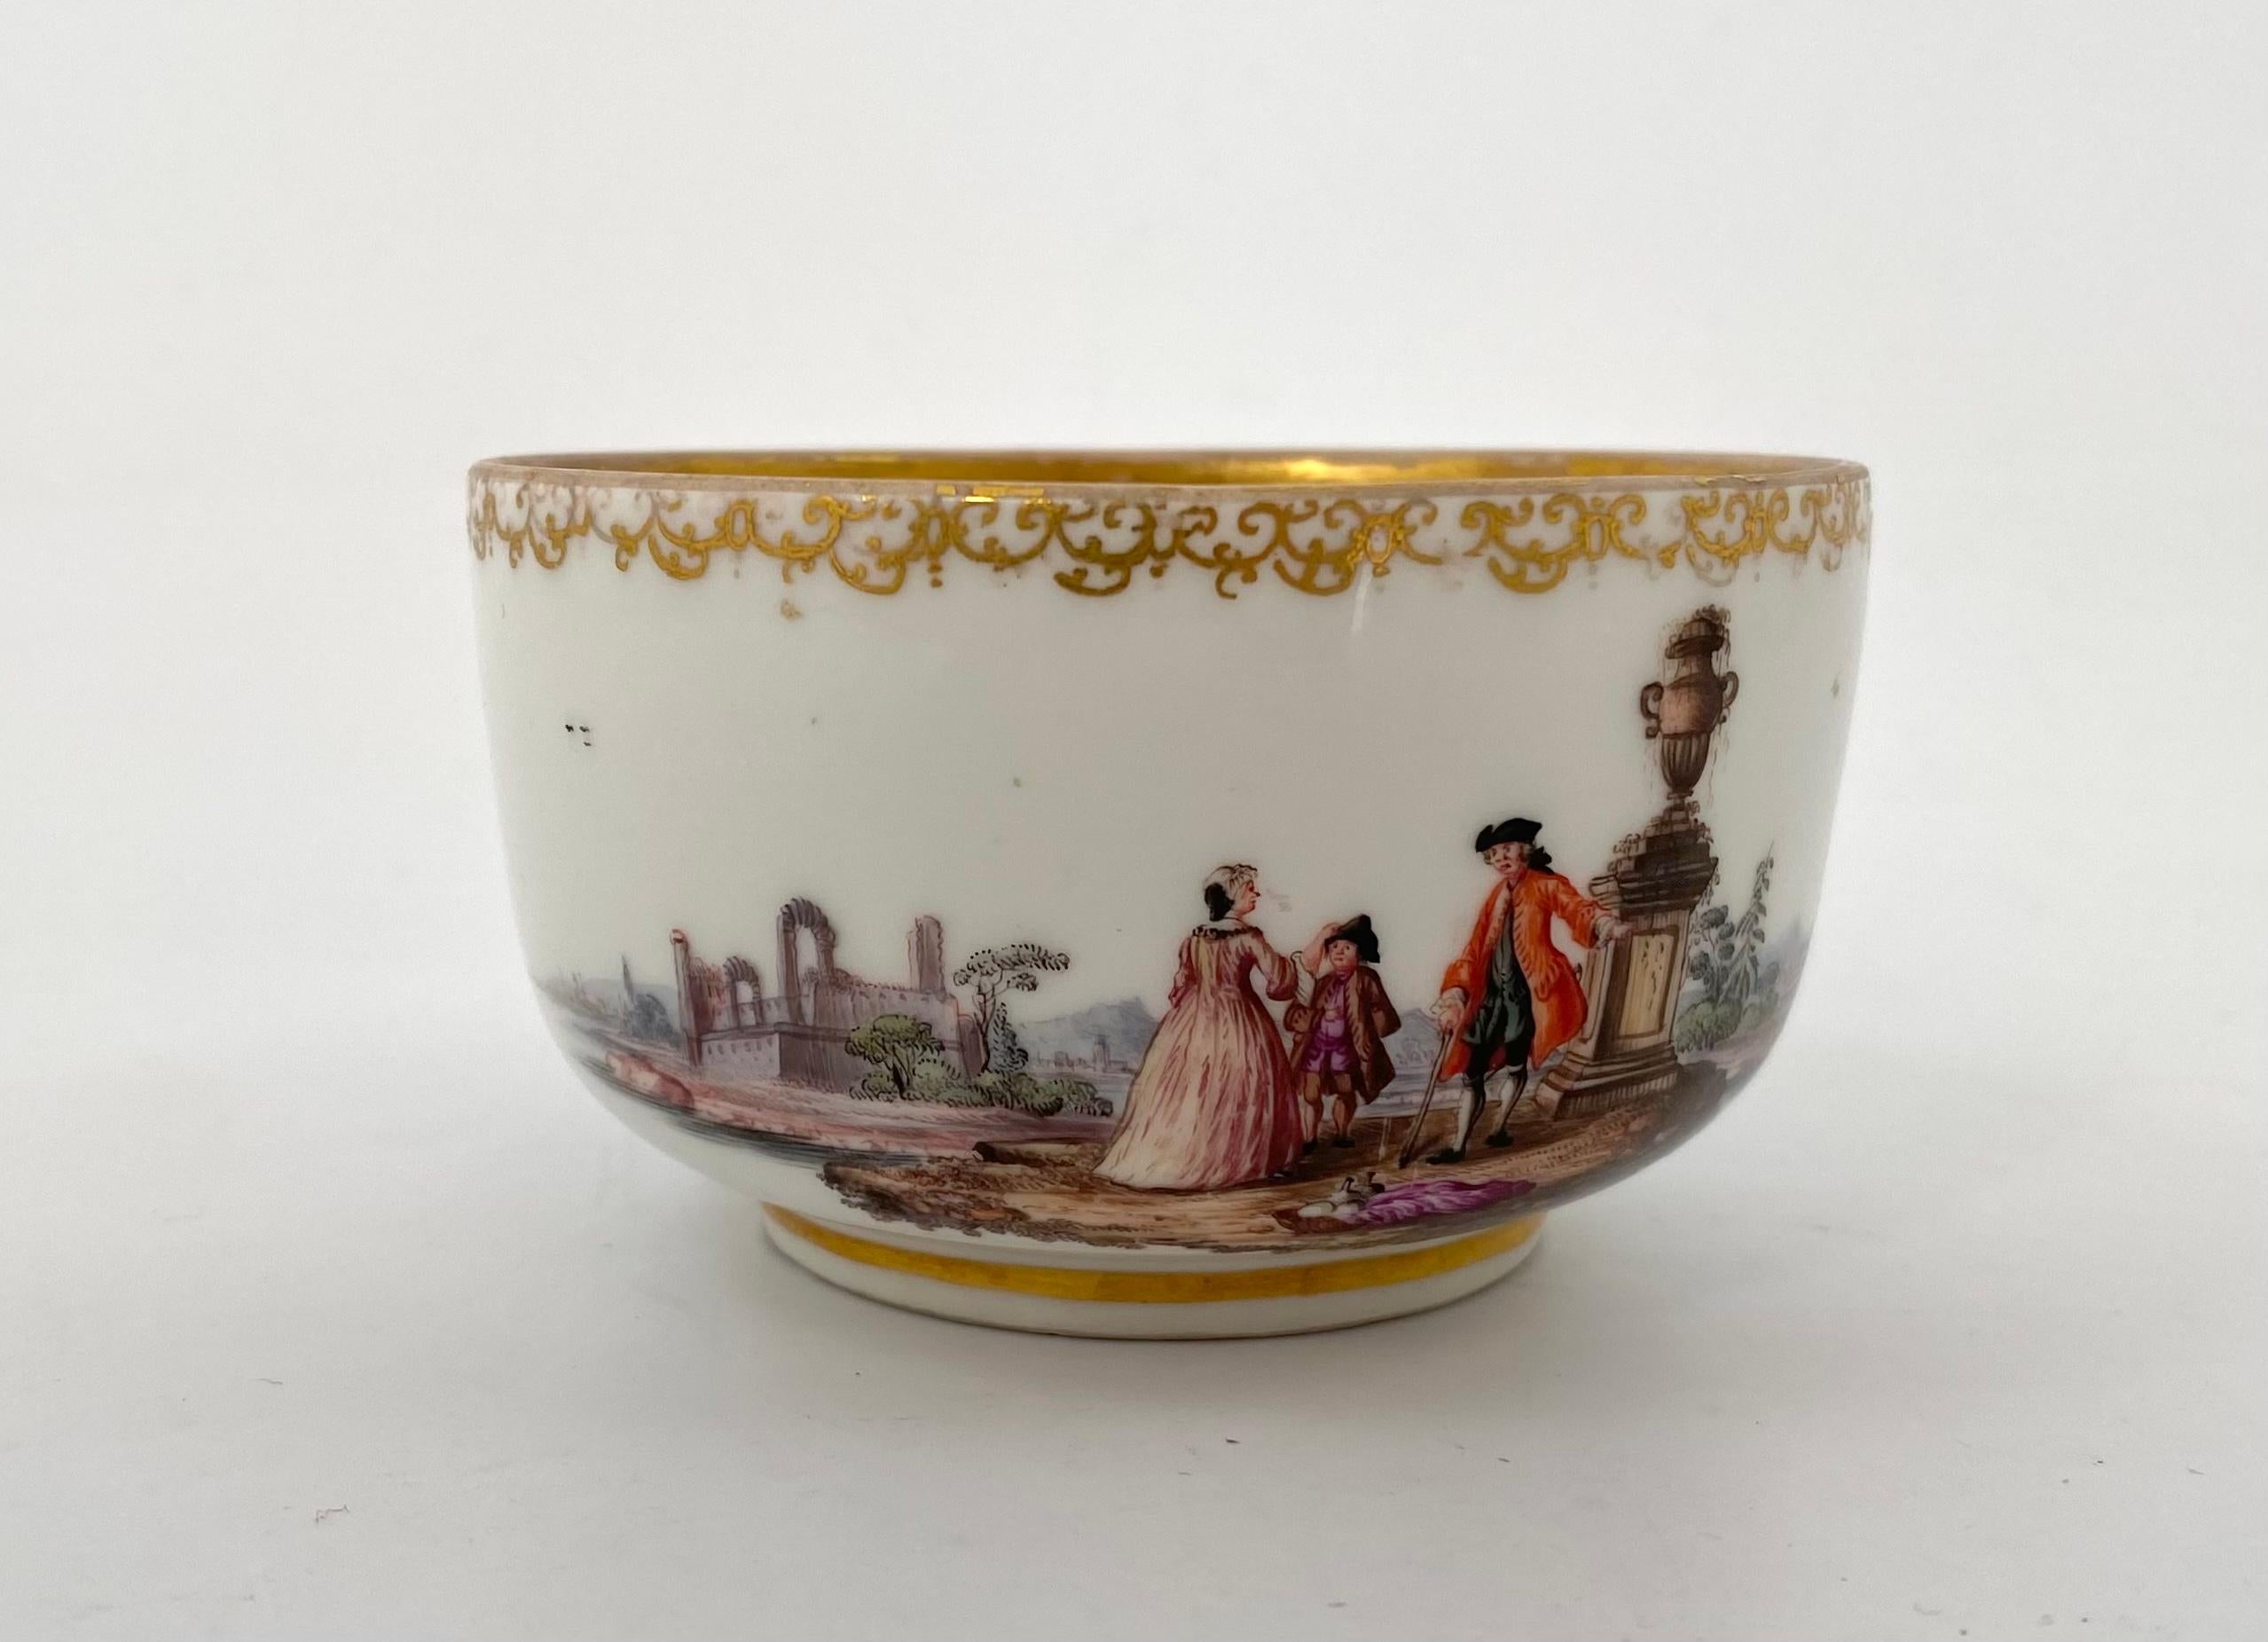 Meissen porcelain bowl, c. 1735. Hand painted to one side, with a scene of figures in Turkish costume, standing before boats in a harbour. The reverse with figures in 18th Century costume, before a large Classical urn, on a river bank, before a